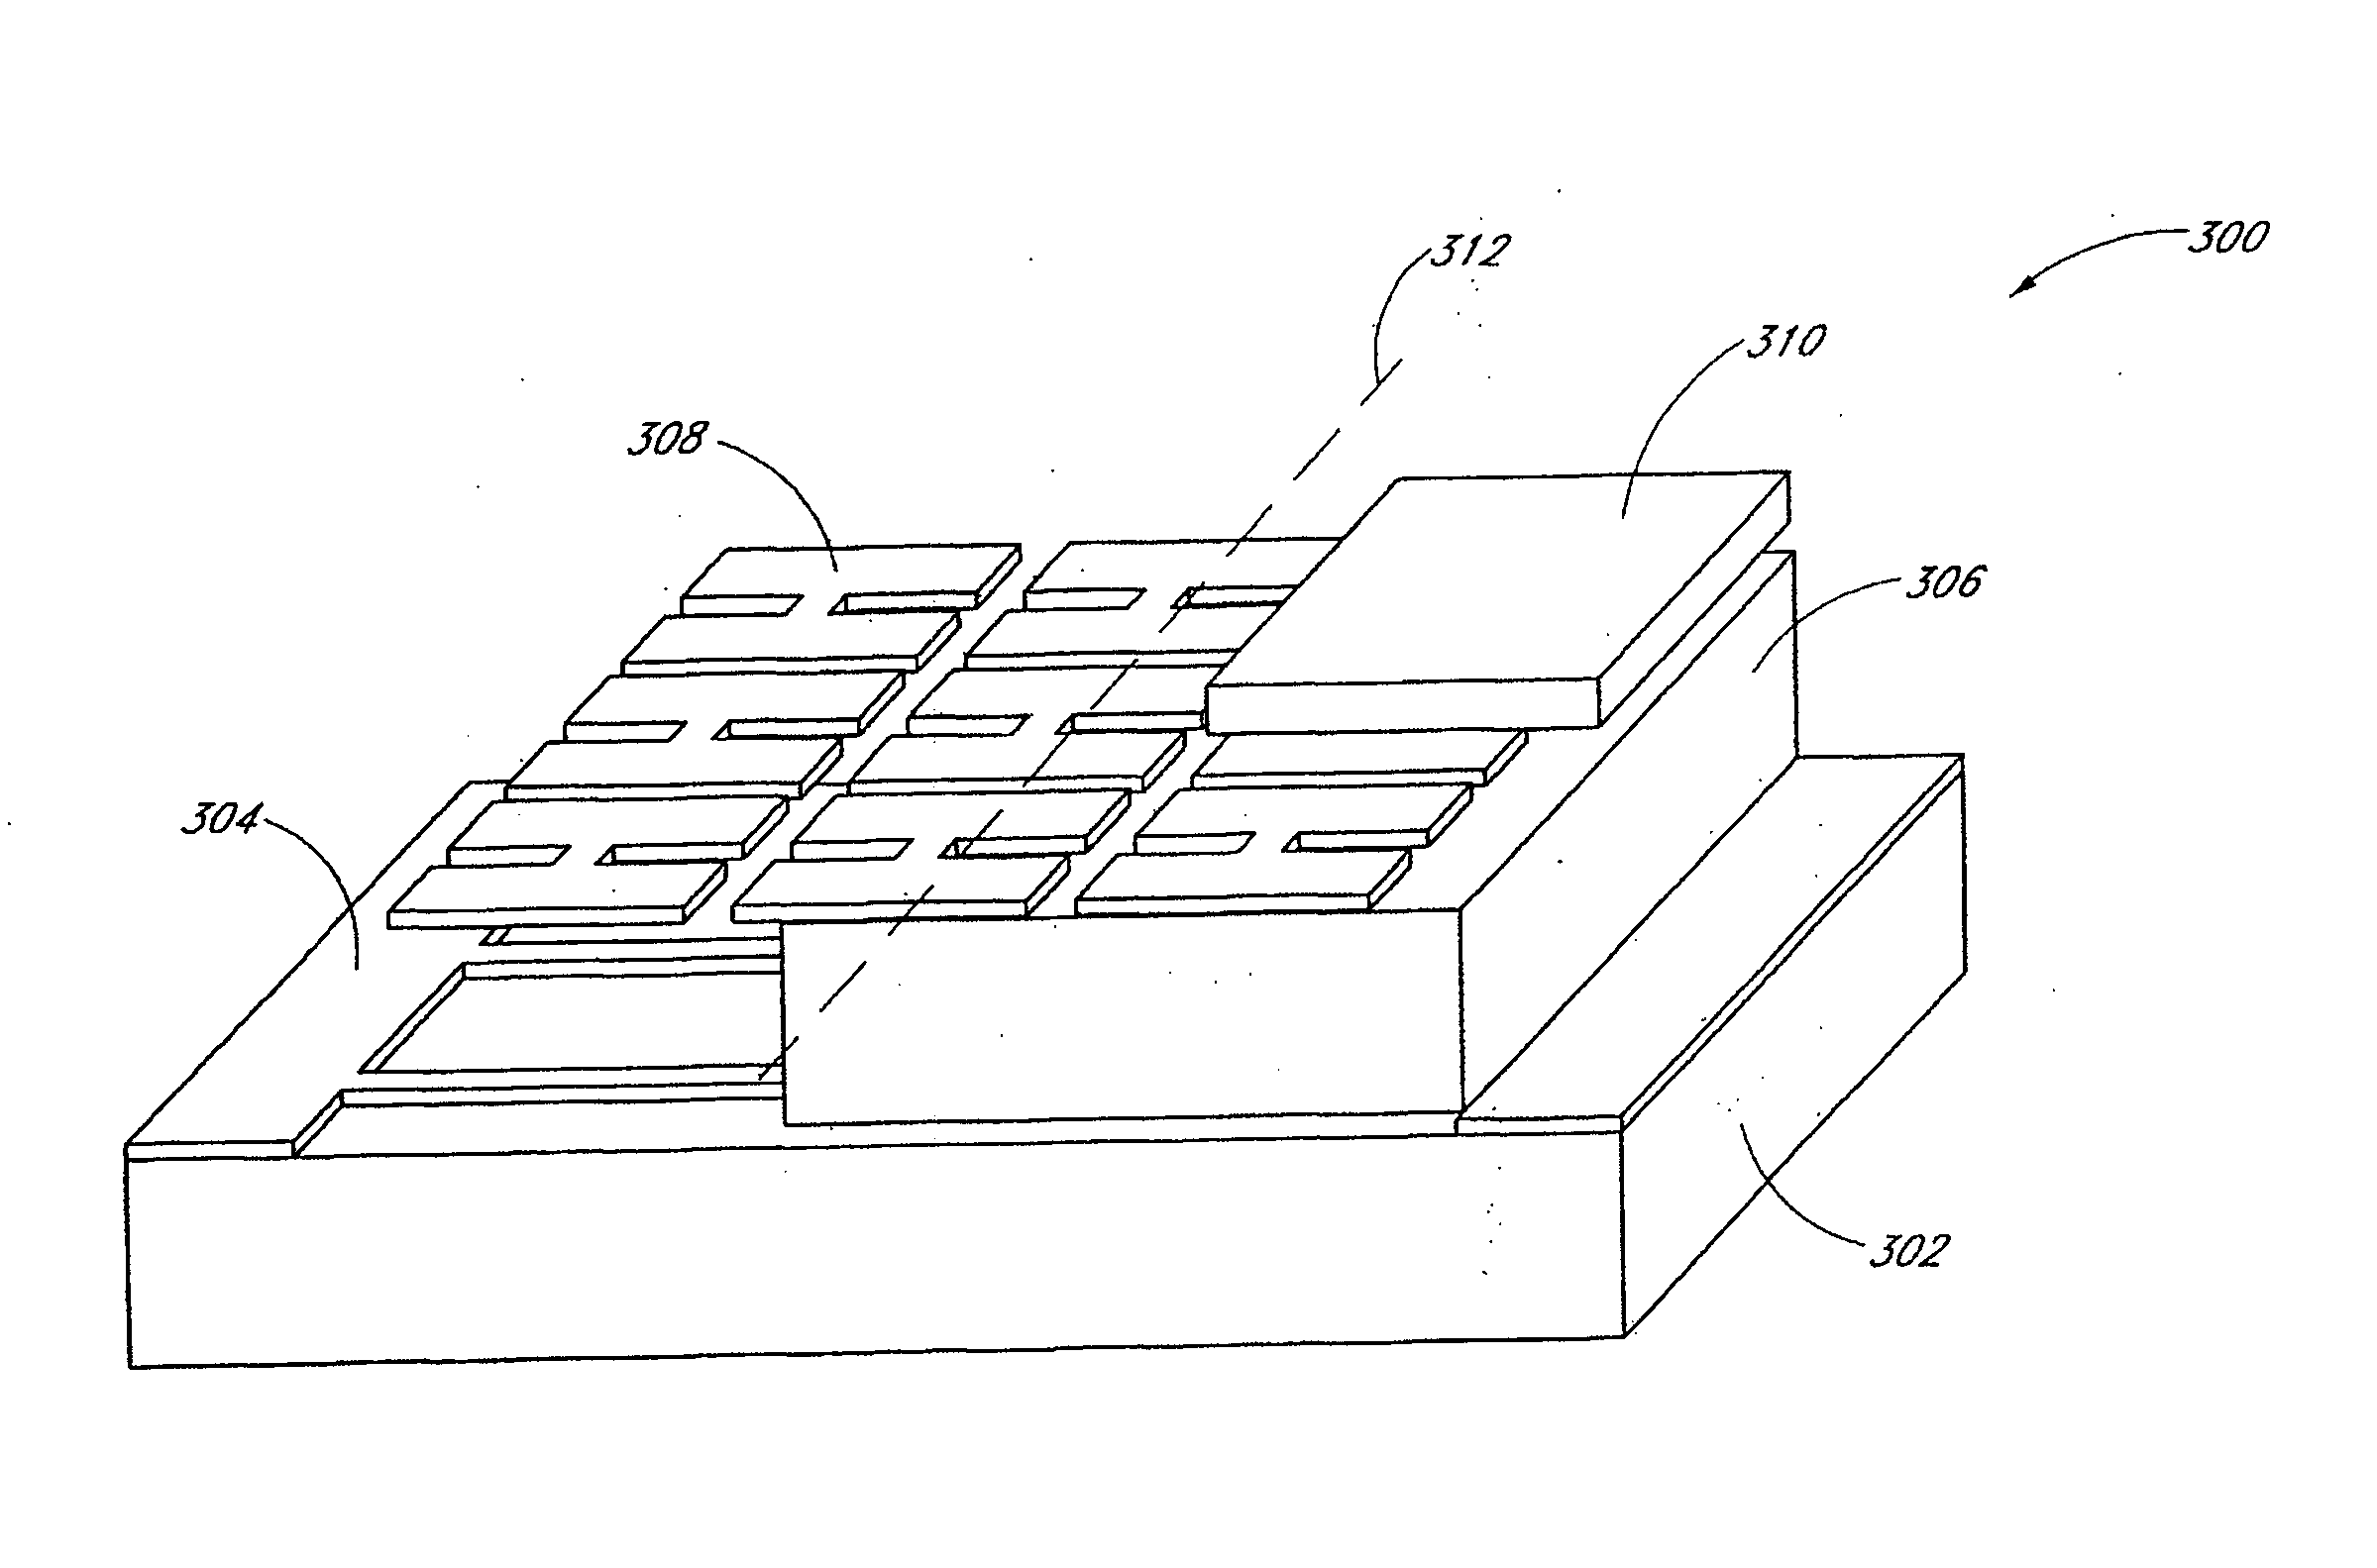 Systems and methods for optical actuation of microfluidics based on OPTO-electrowetting